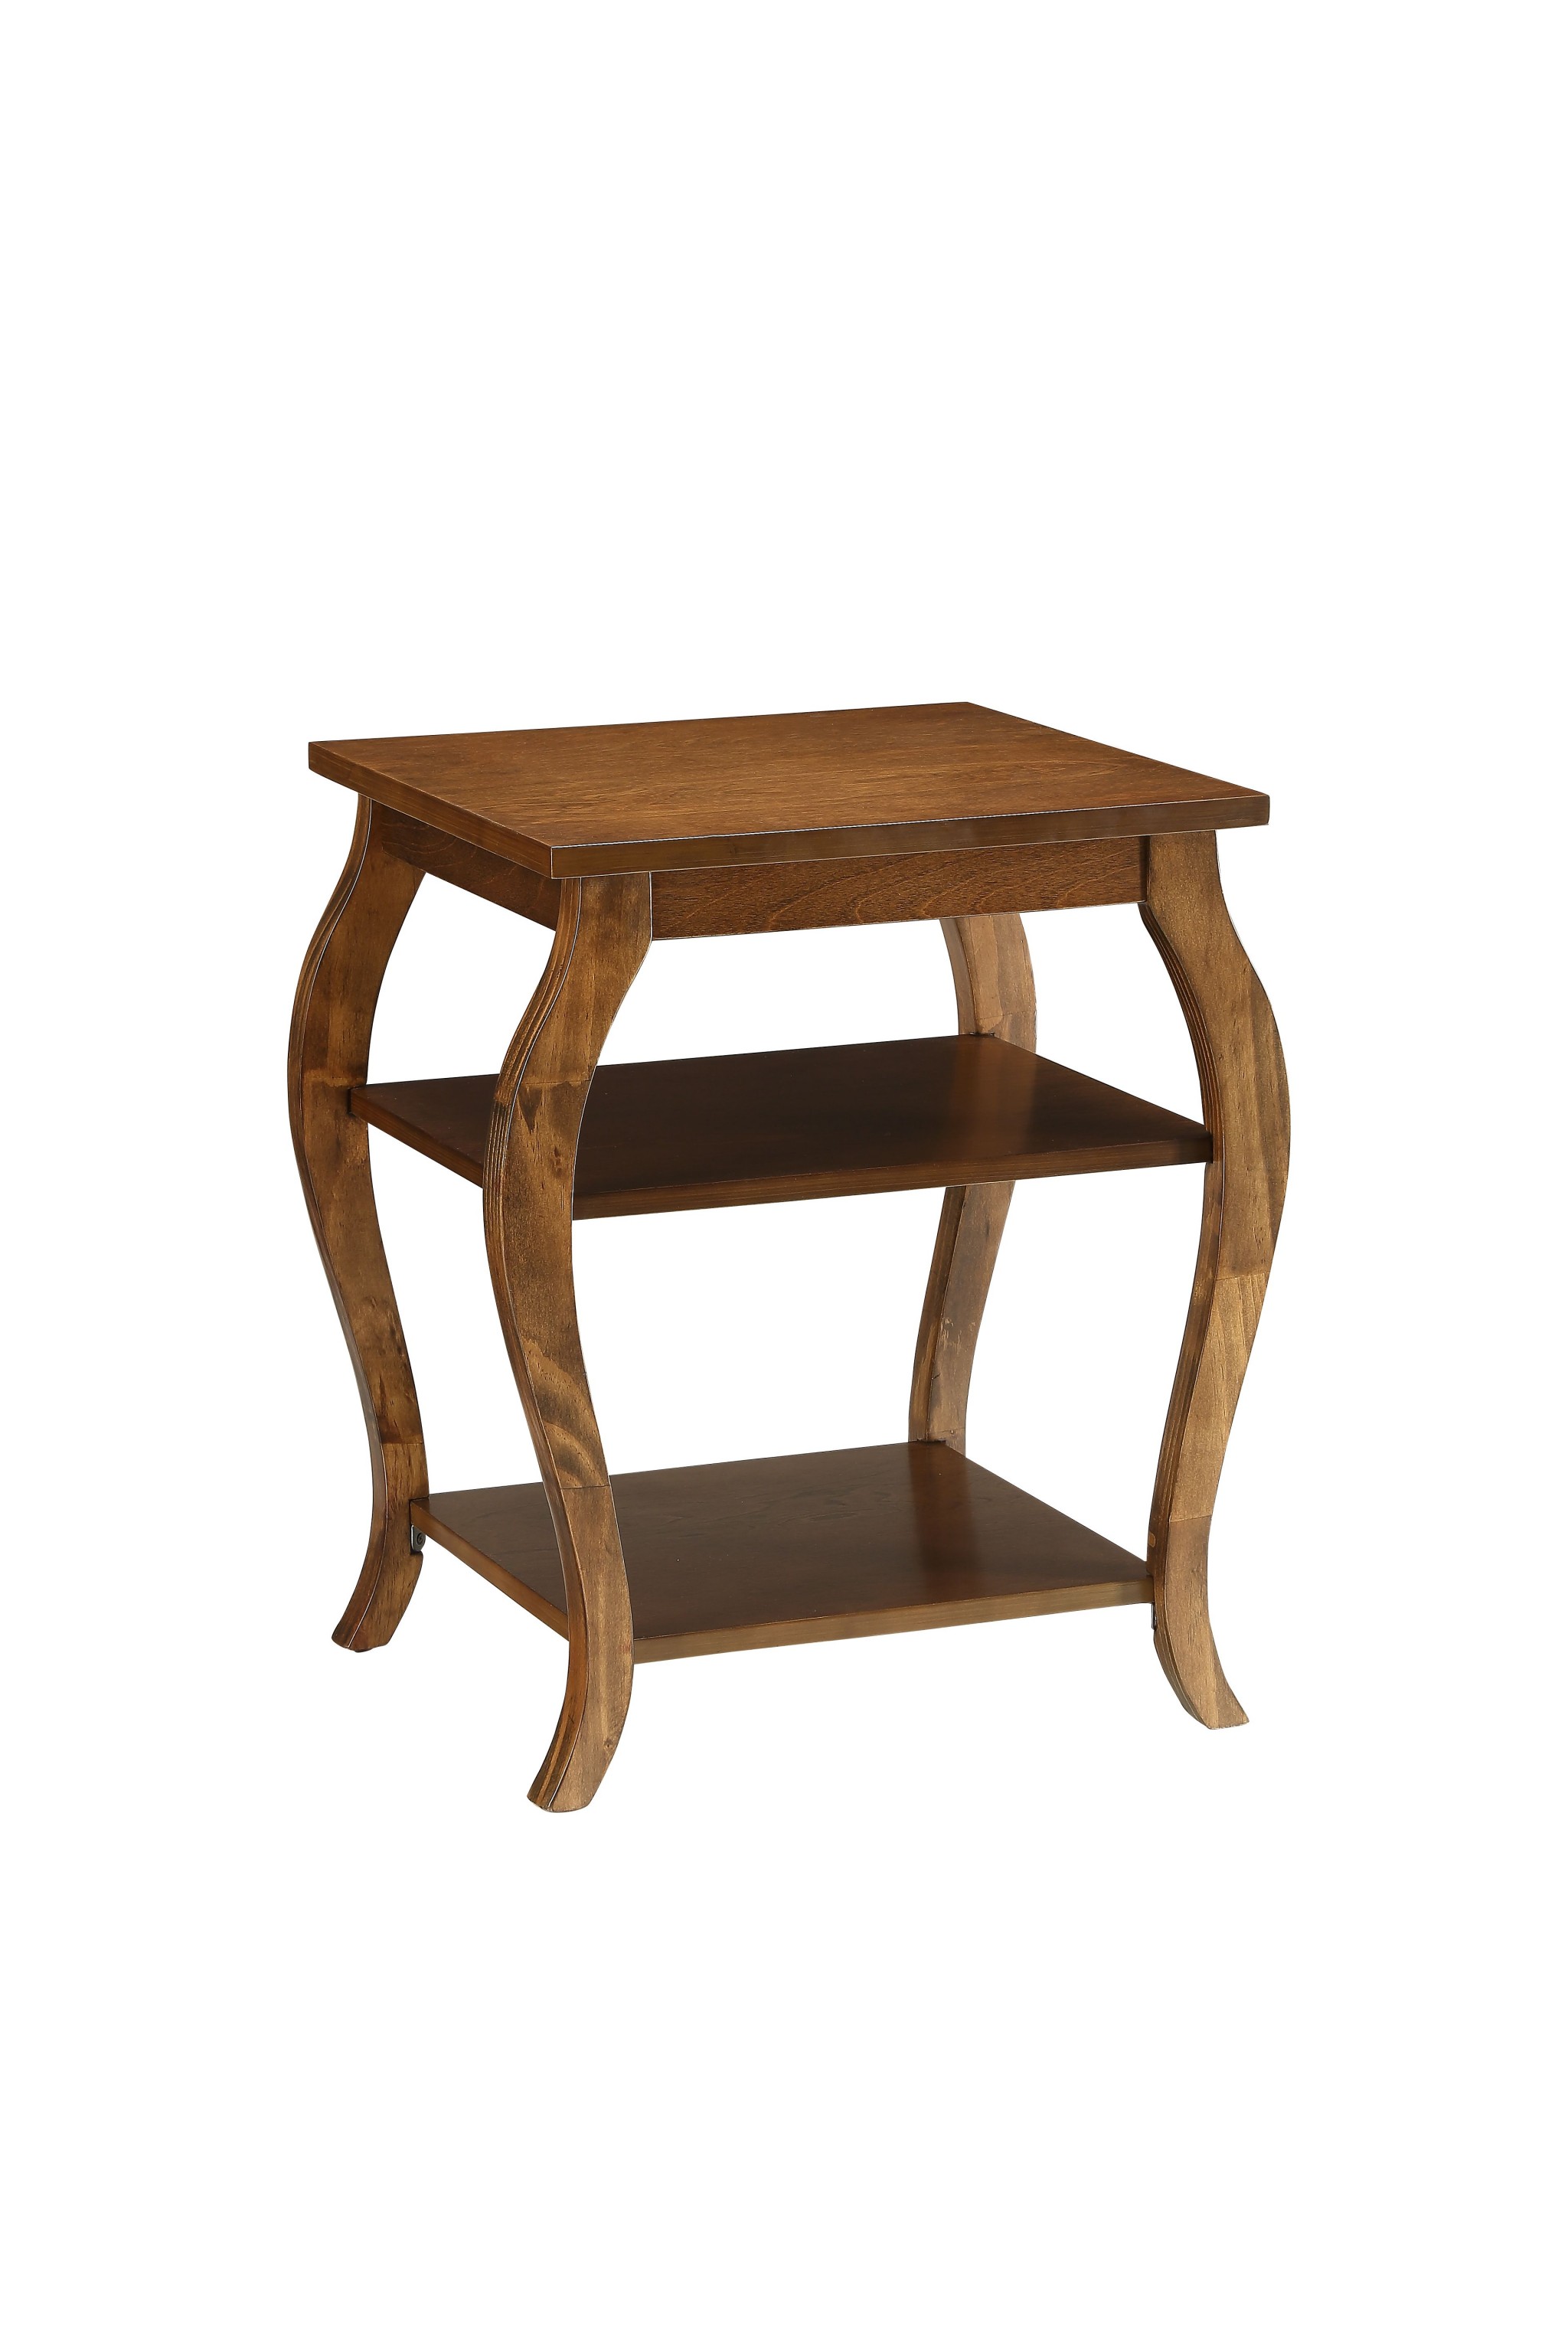 Square Walnut Wood End Table with Shelves